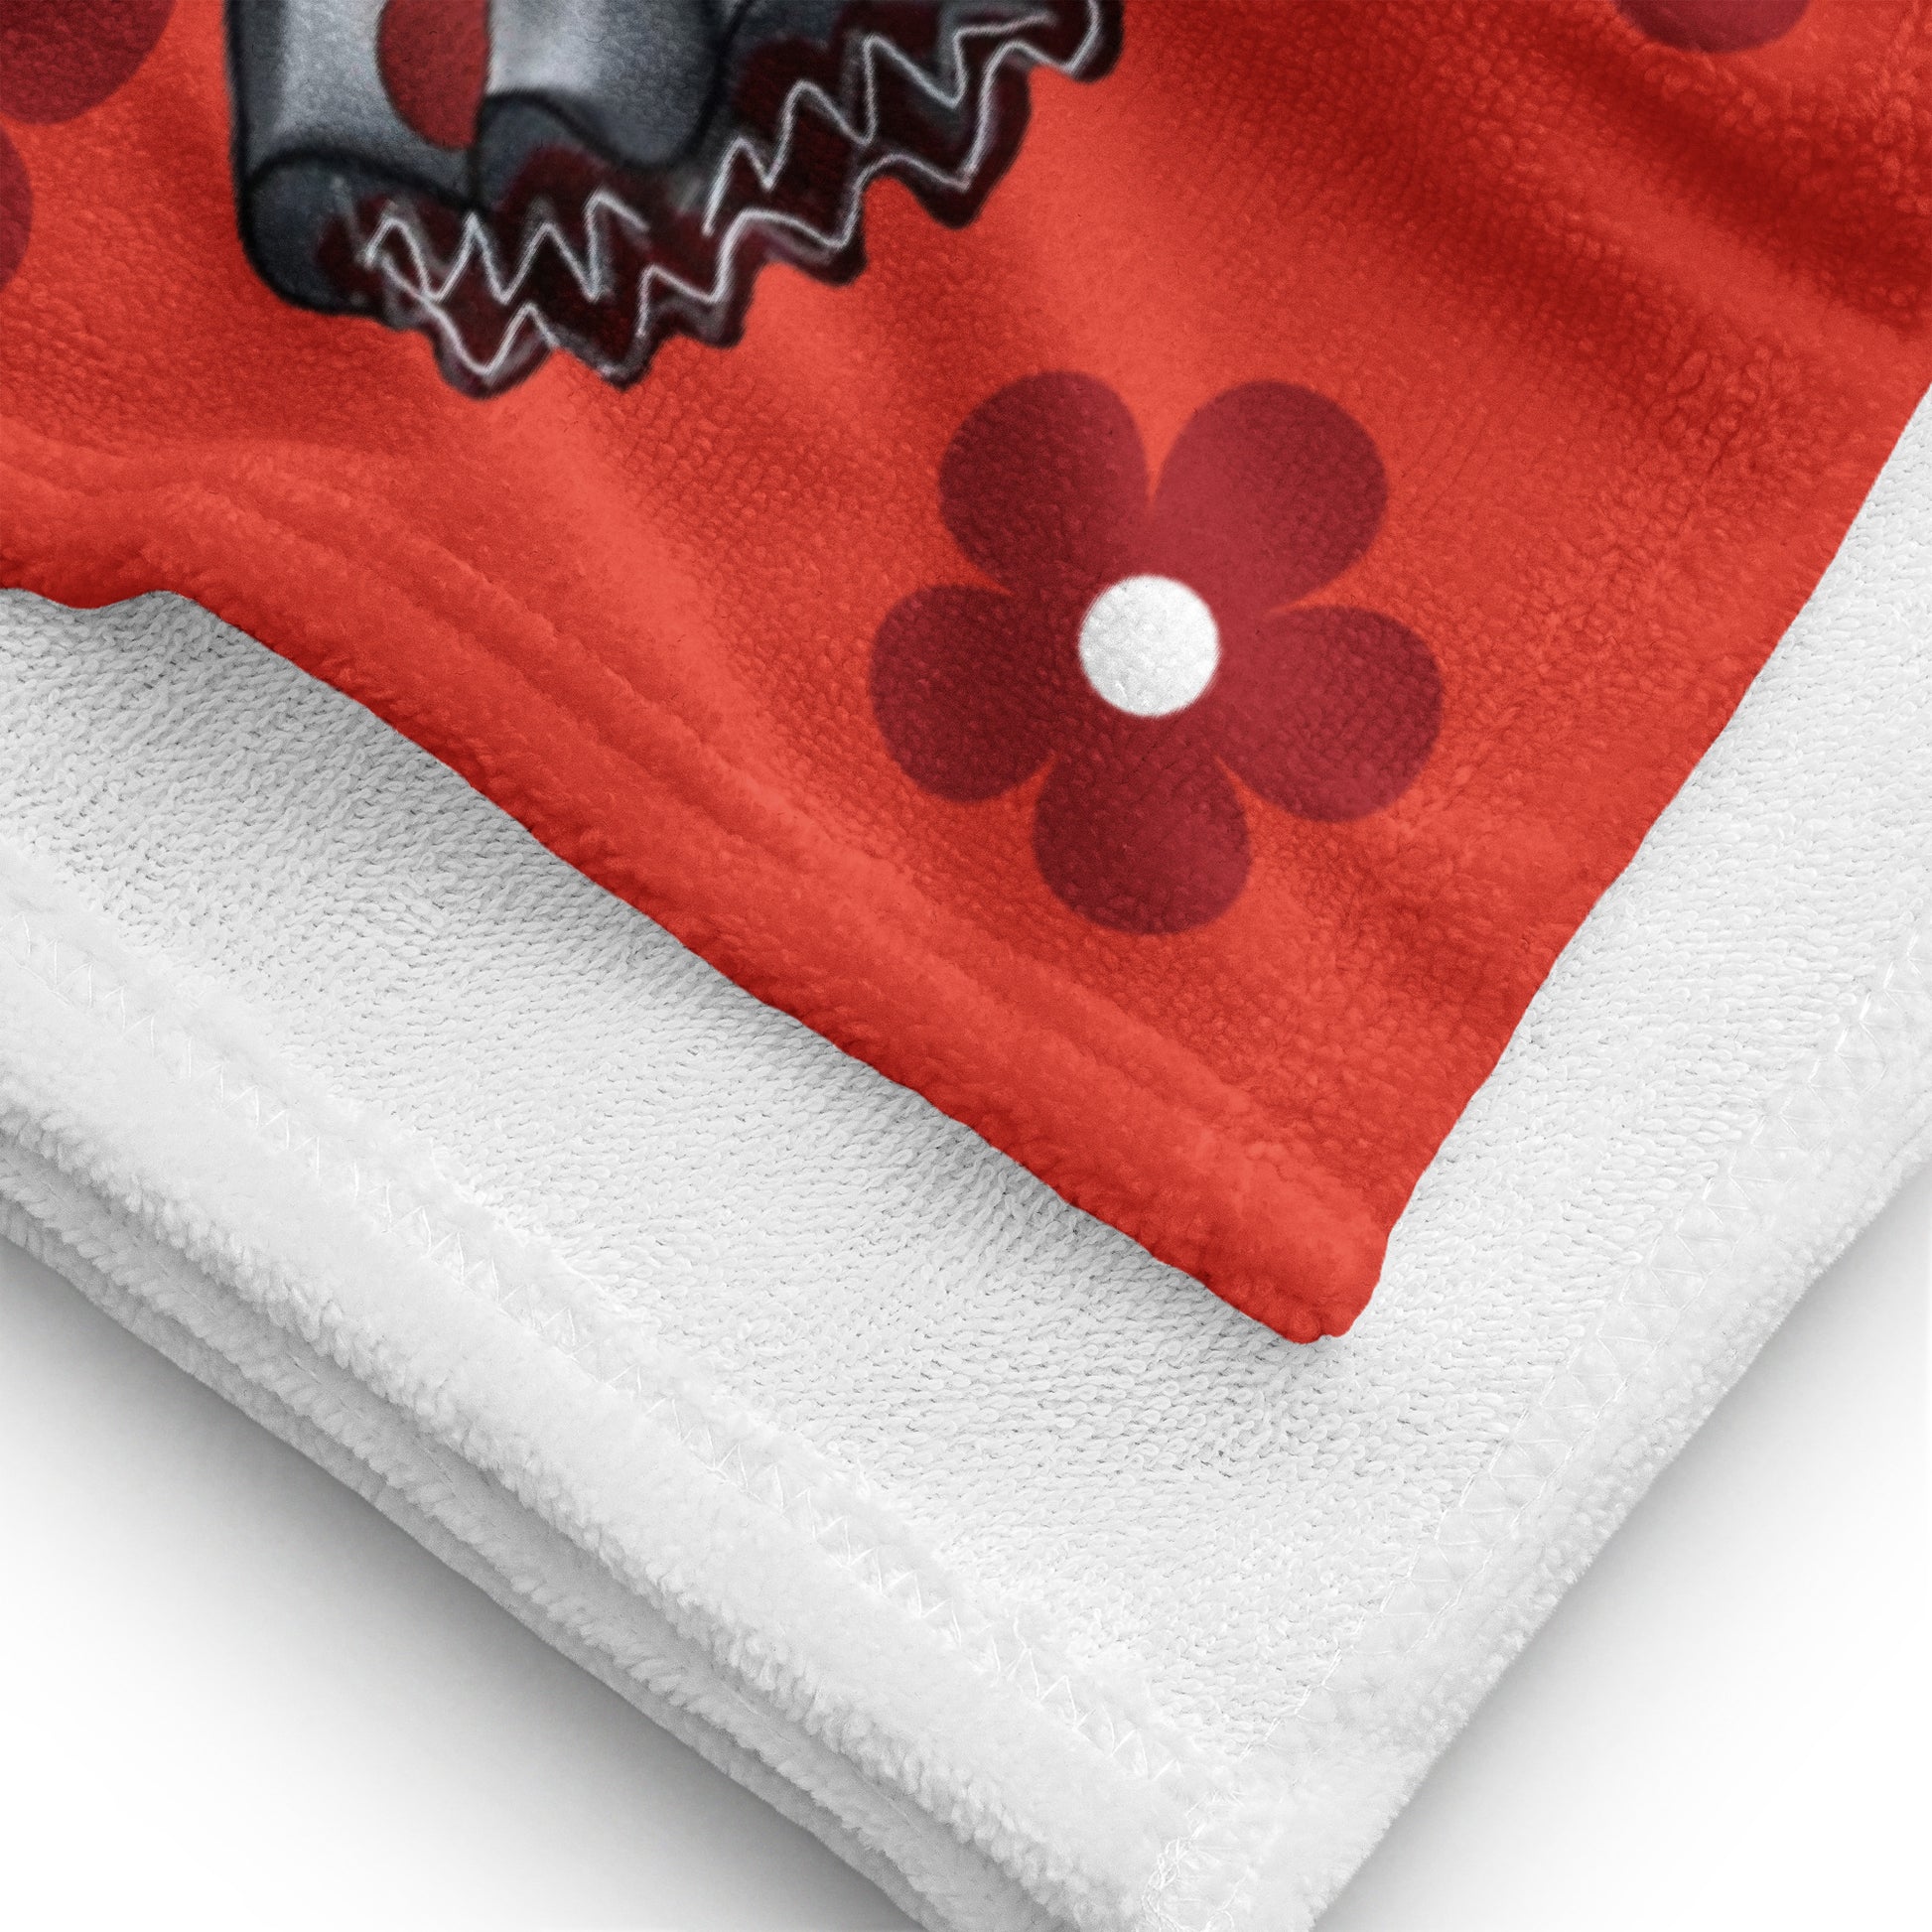 a red and white towel with a black flower on it